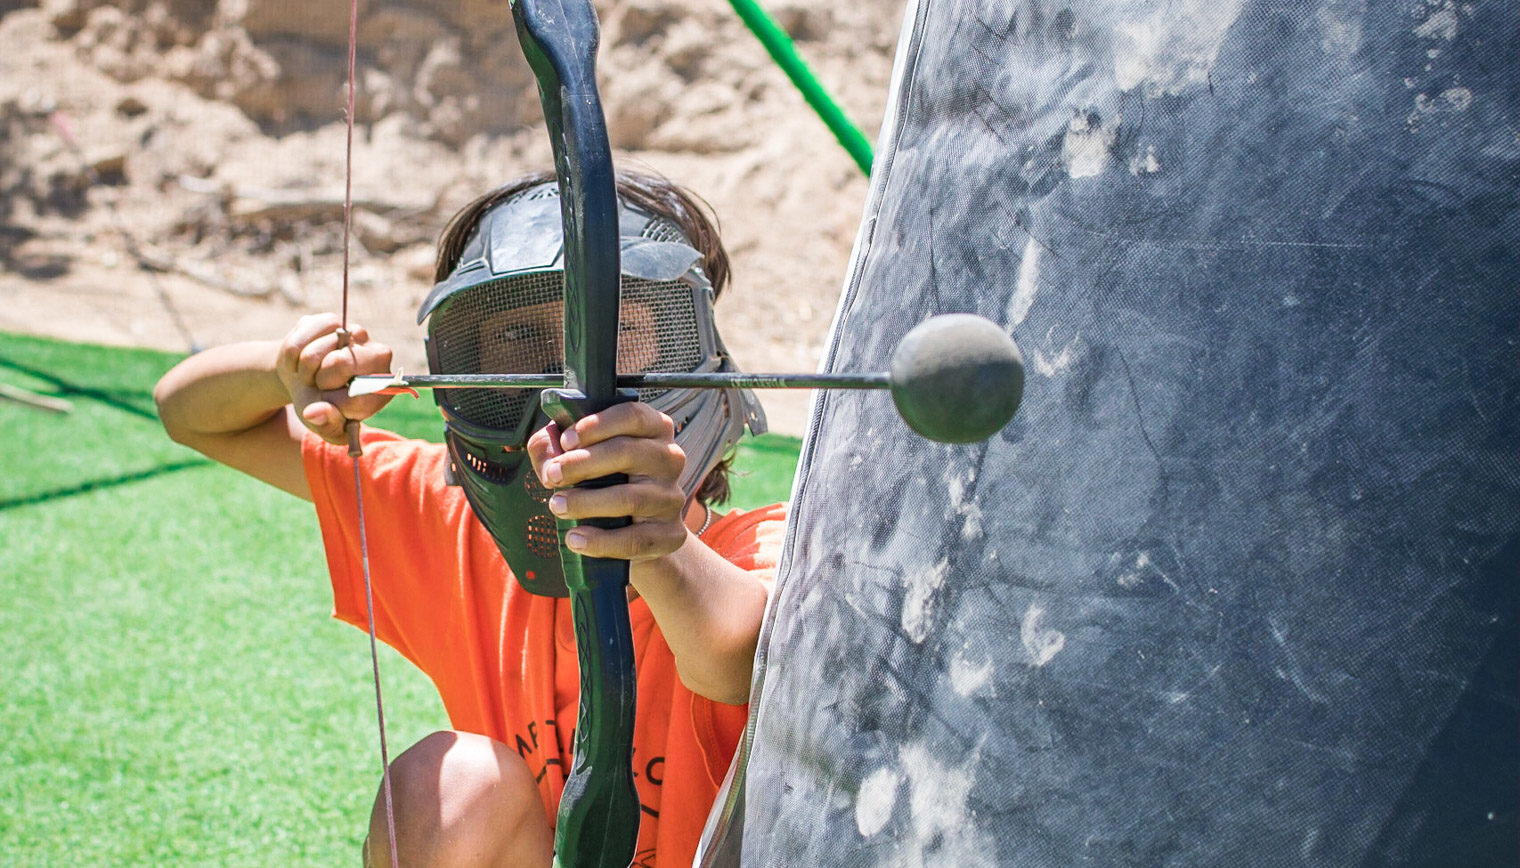 A person aiming a bow and arrow from behind a barrier.